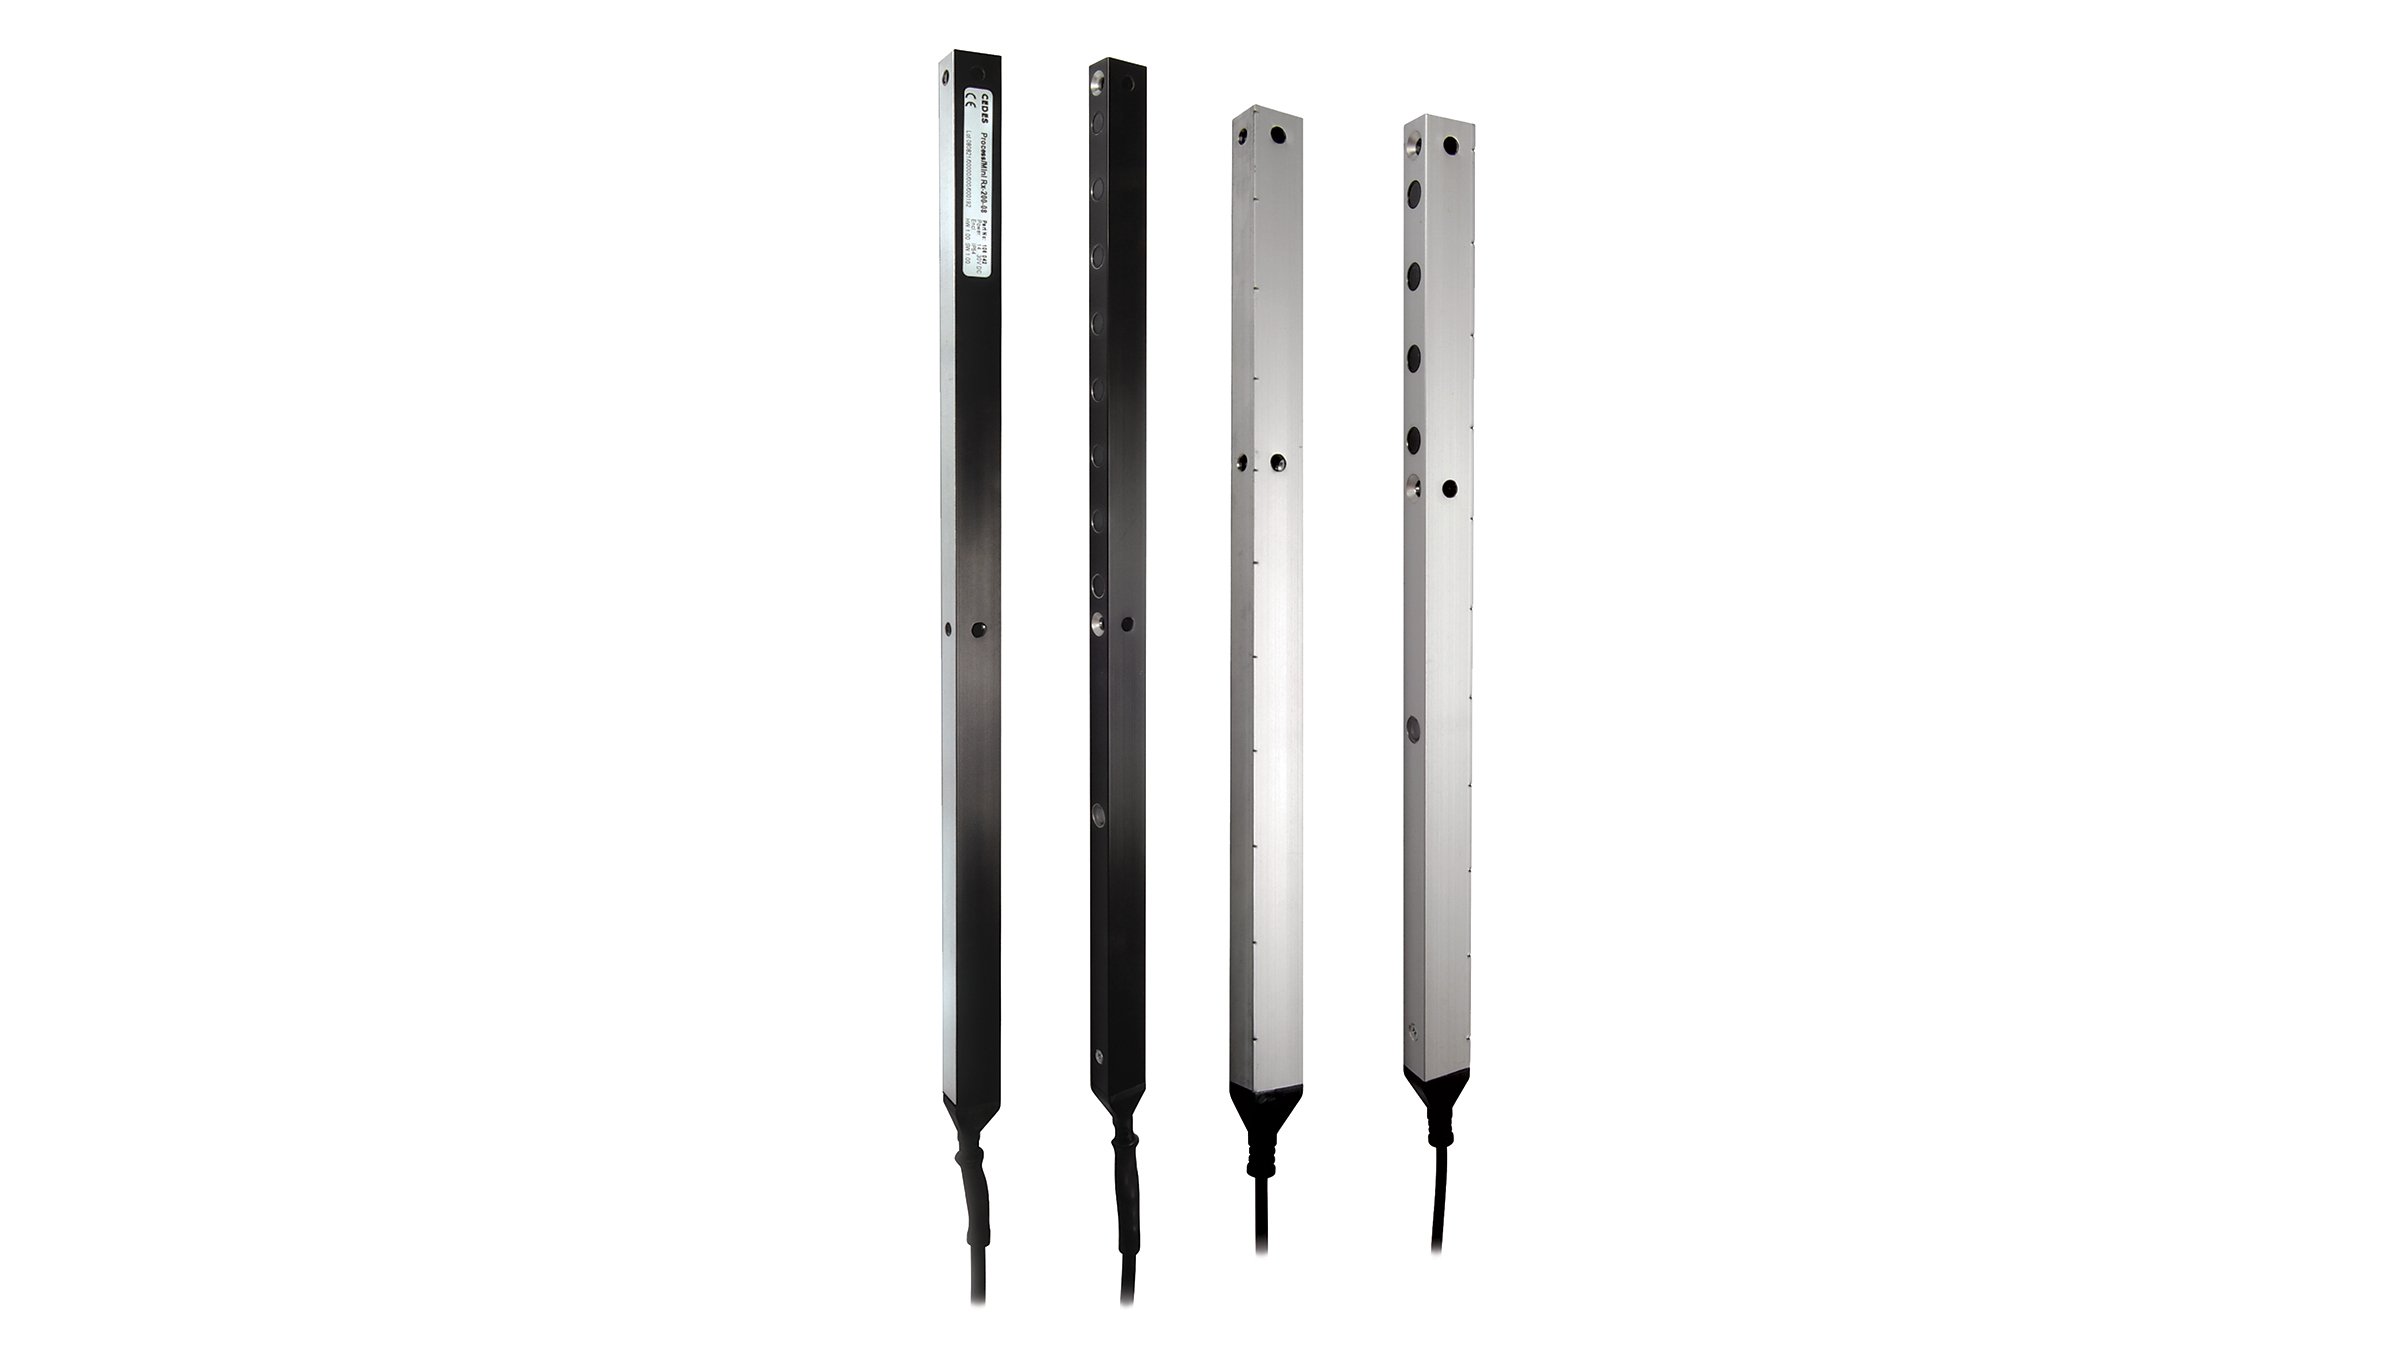 Four Allen-Bradley black and stainless steel, rectangular sensors with integrated cables.